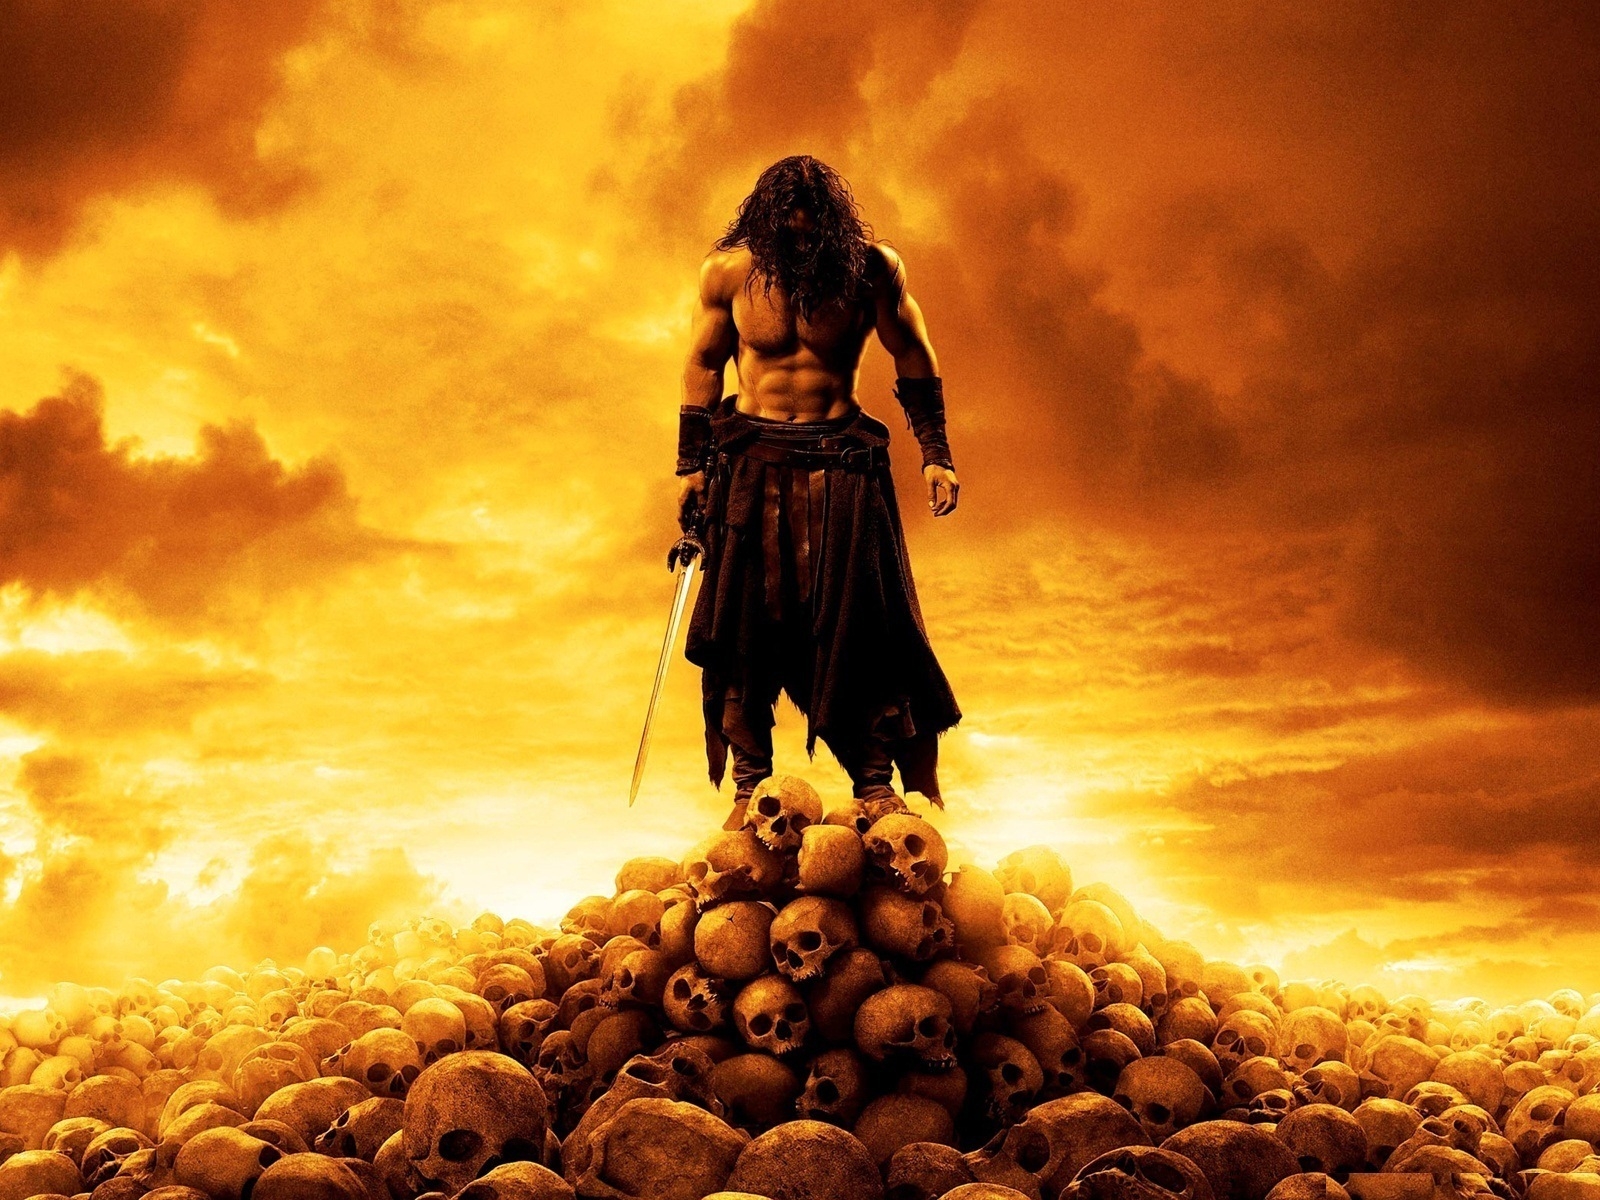 Conan the Barbarian 2011 for 1600 x 1200 resolution